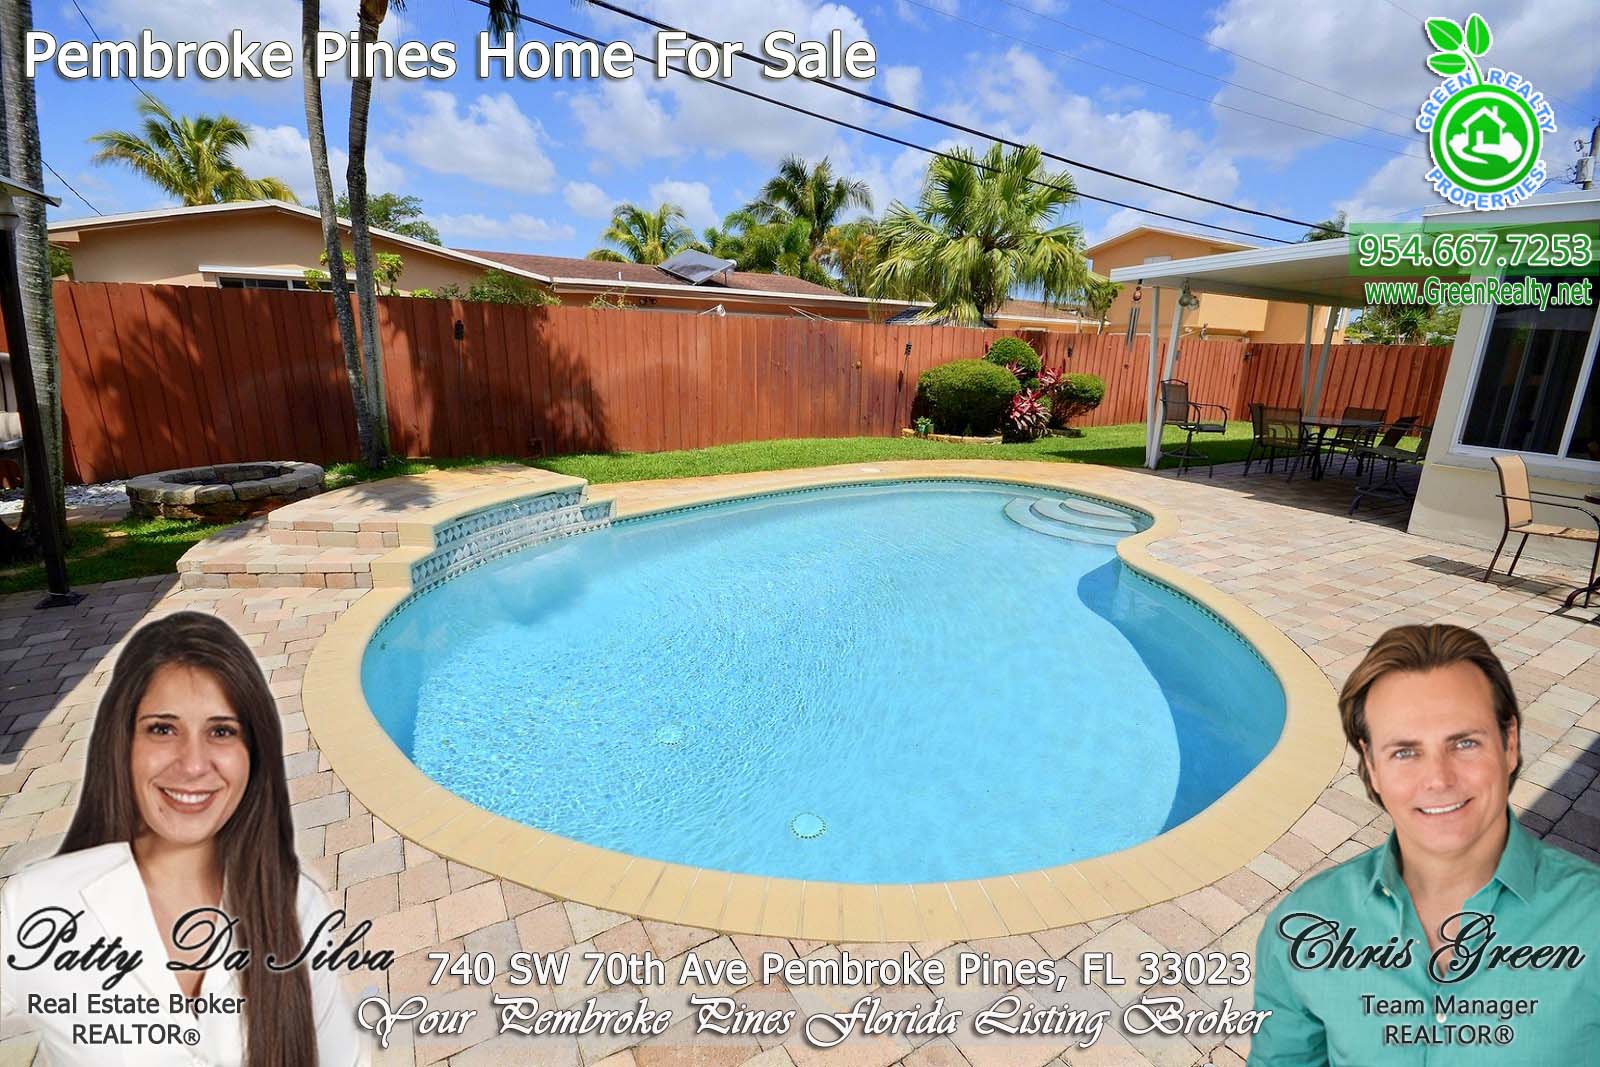 26 Homes For Sale in Pembroke Pines (2)